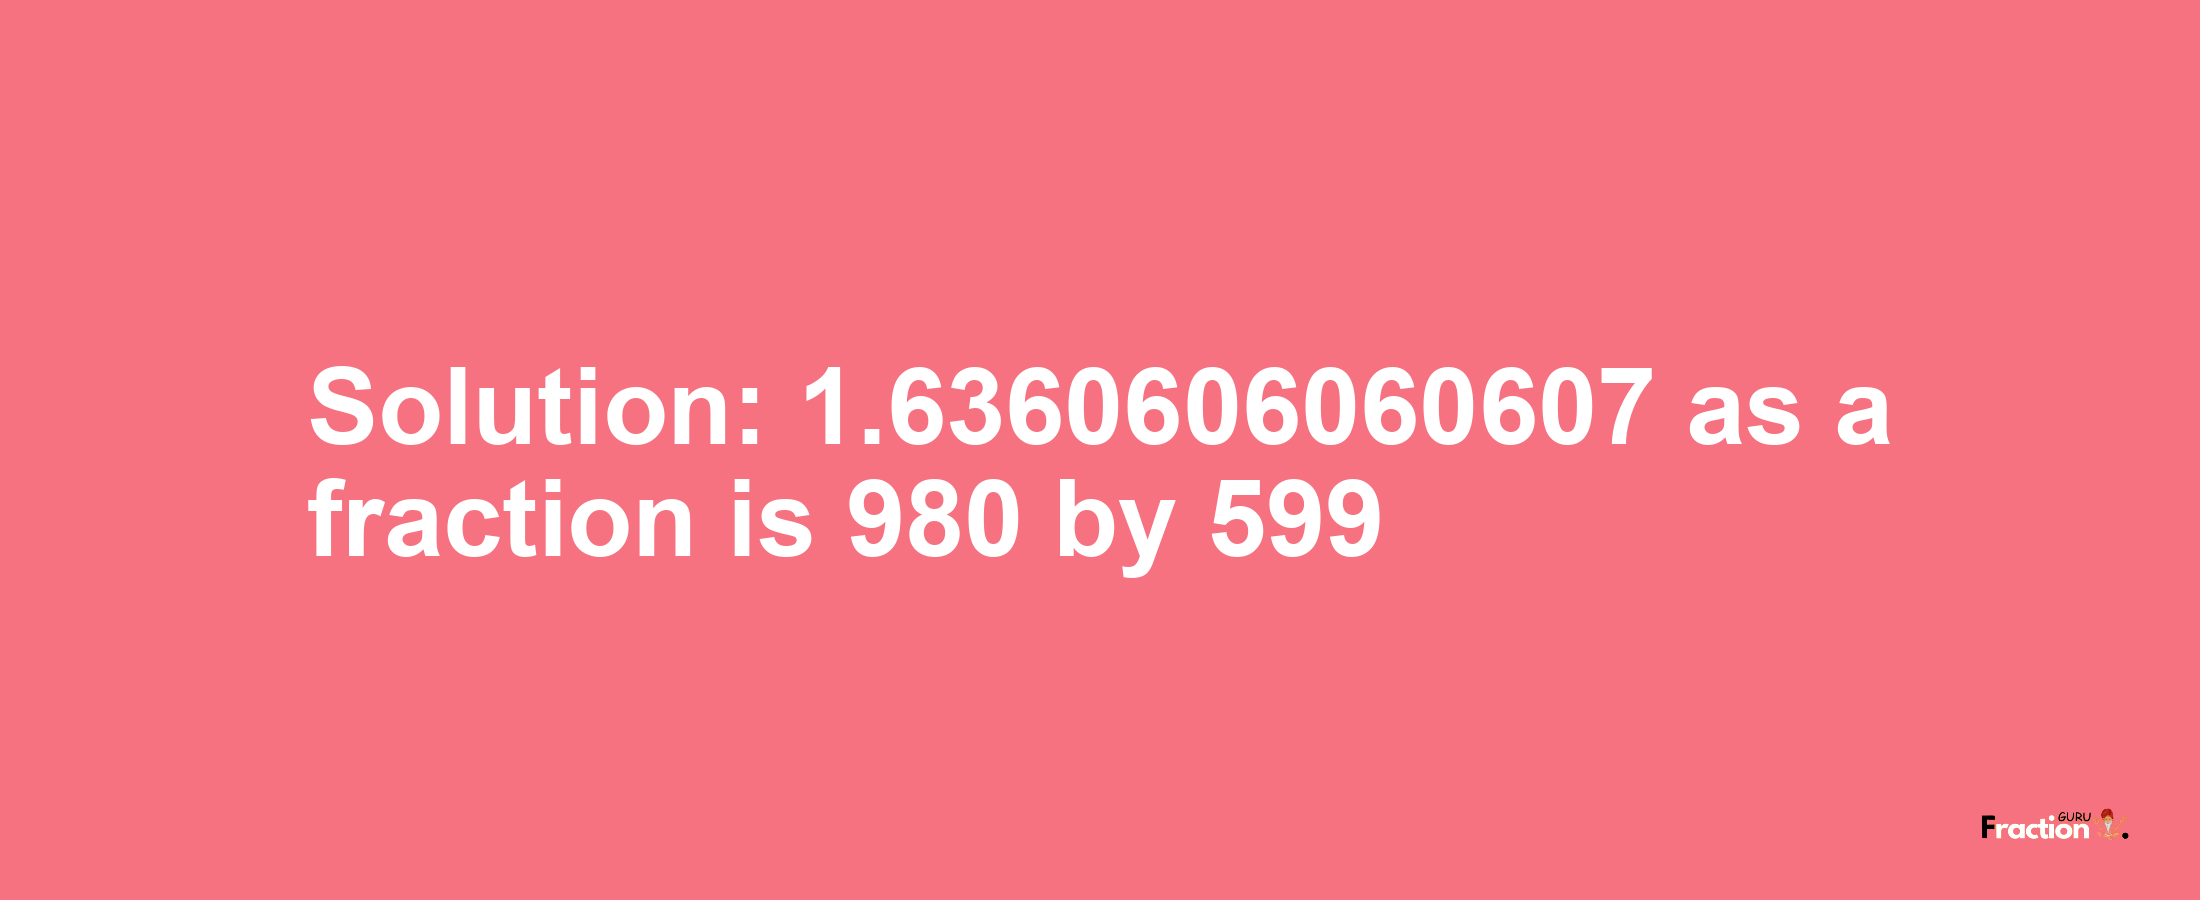 Solution:1.6360606060607 as a fraction is 980/599